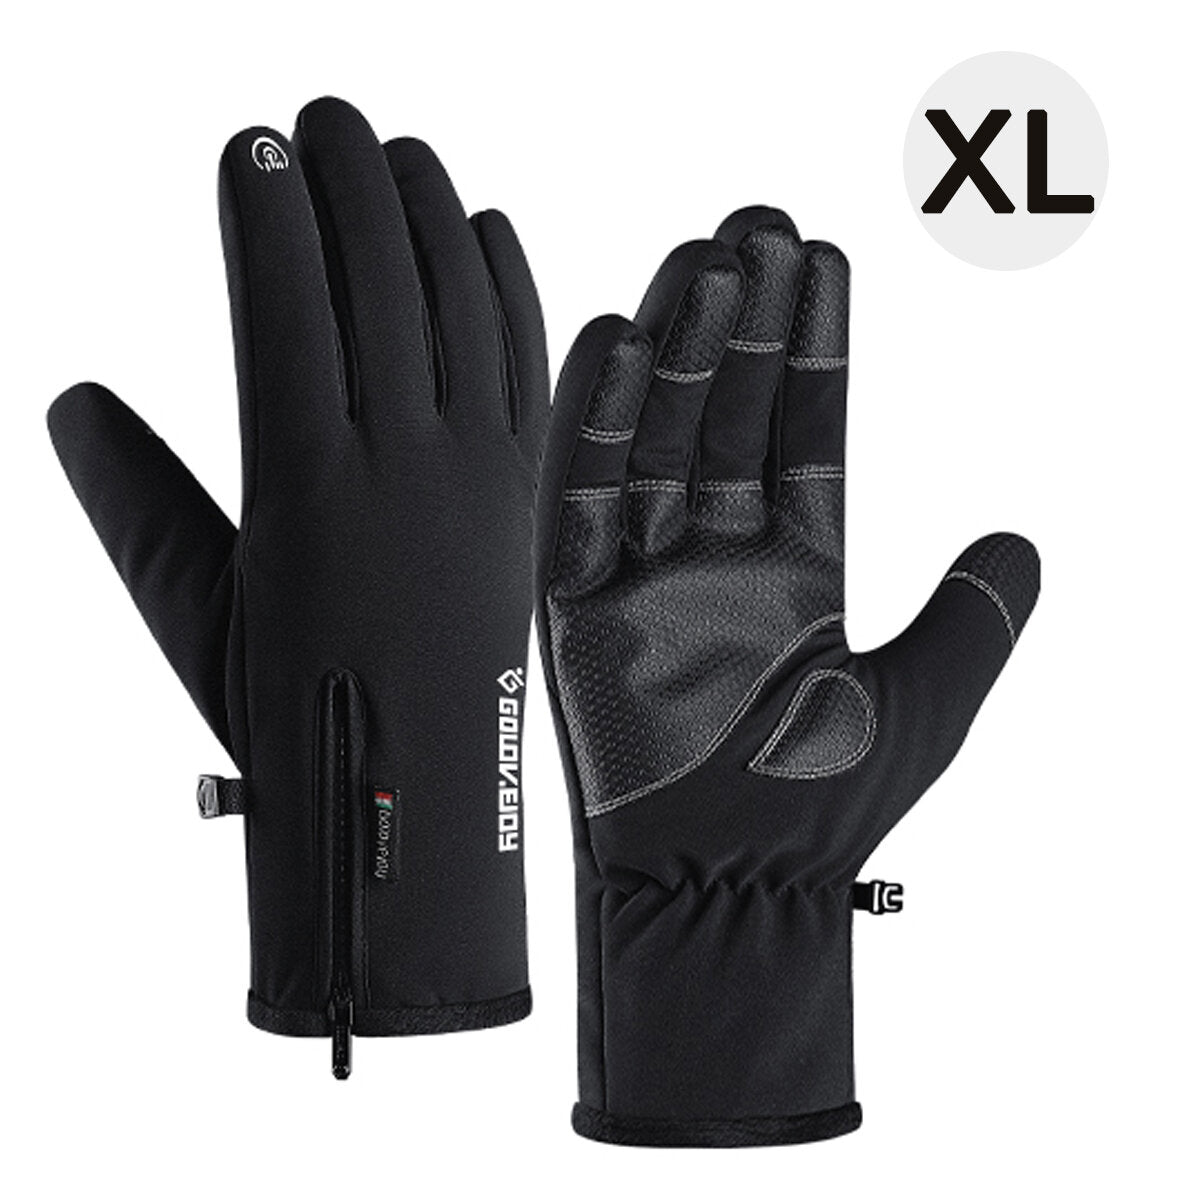 Motorcycle Warm Driving Gloves Windproof Anti-slip Thermal Touch Screen Universal